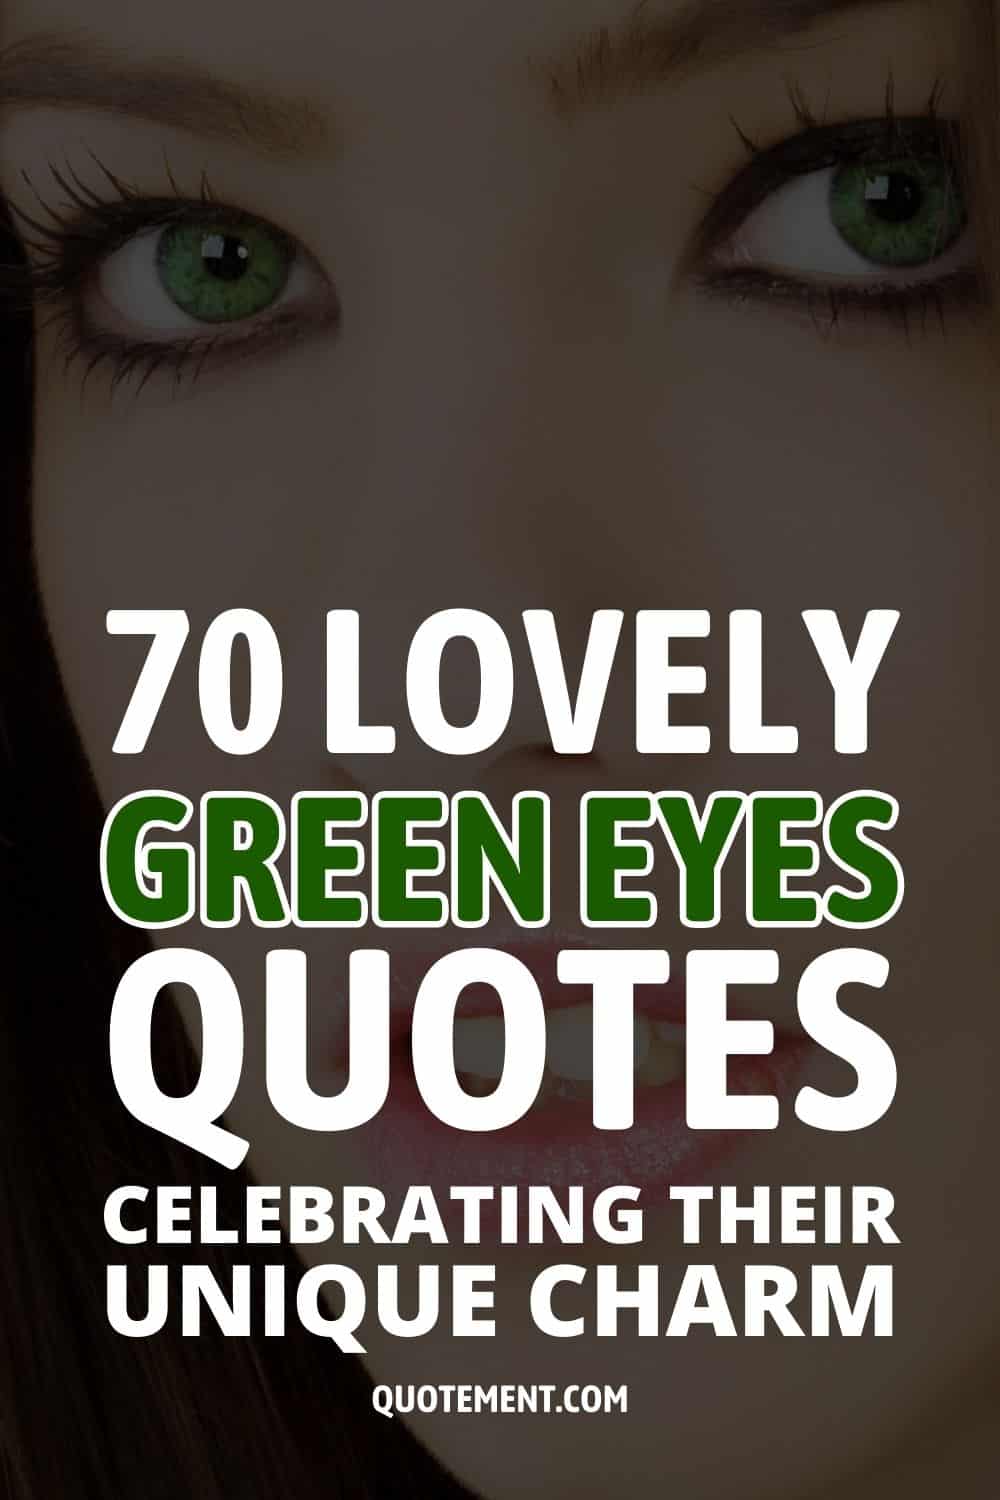 70 Lovely Green Eyes Quotes Celebrating Their Unique Charm